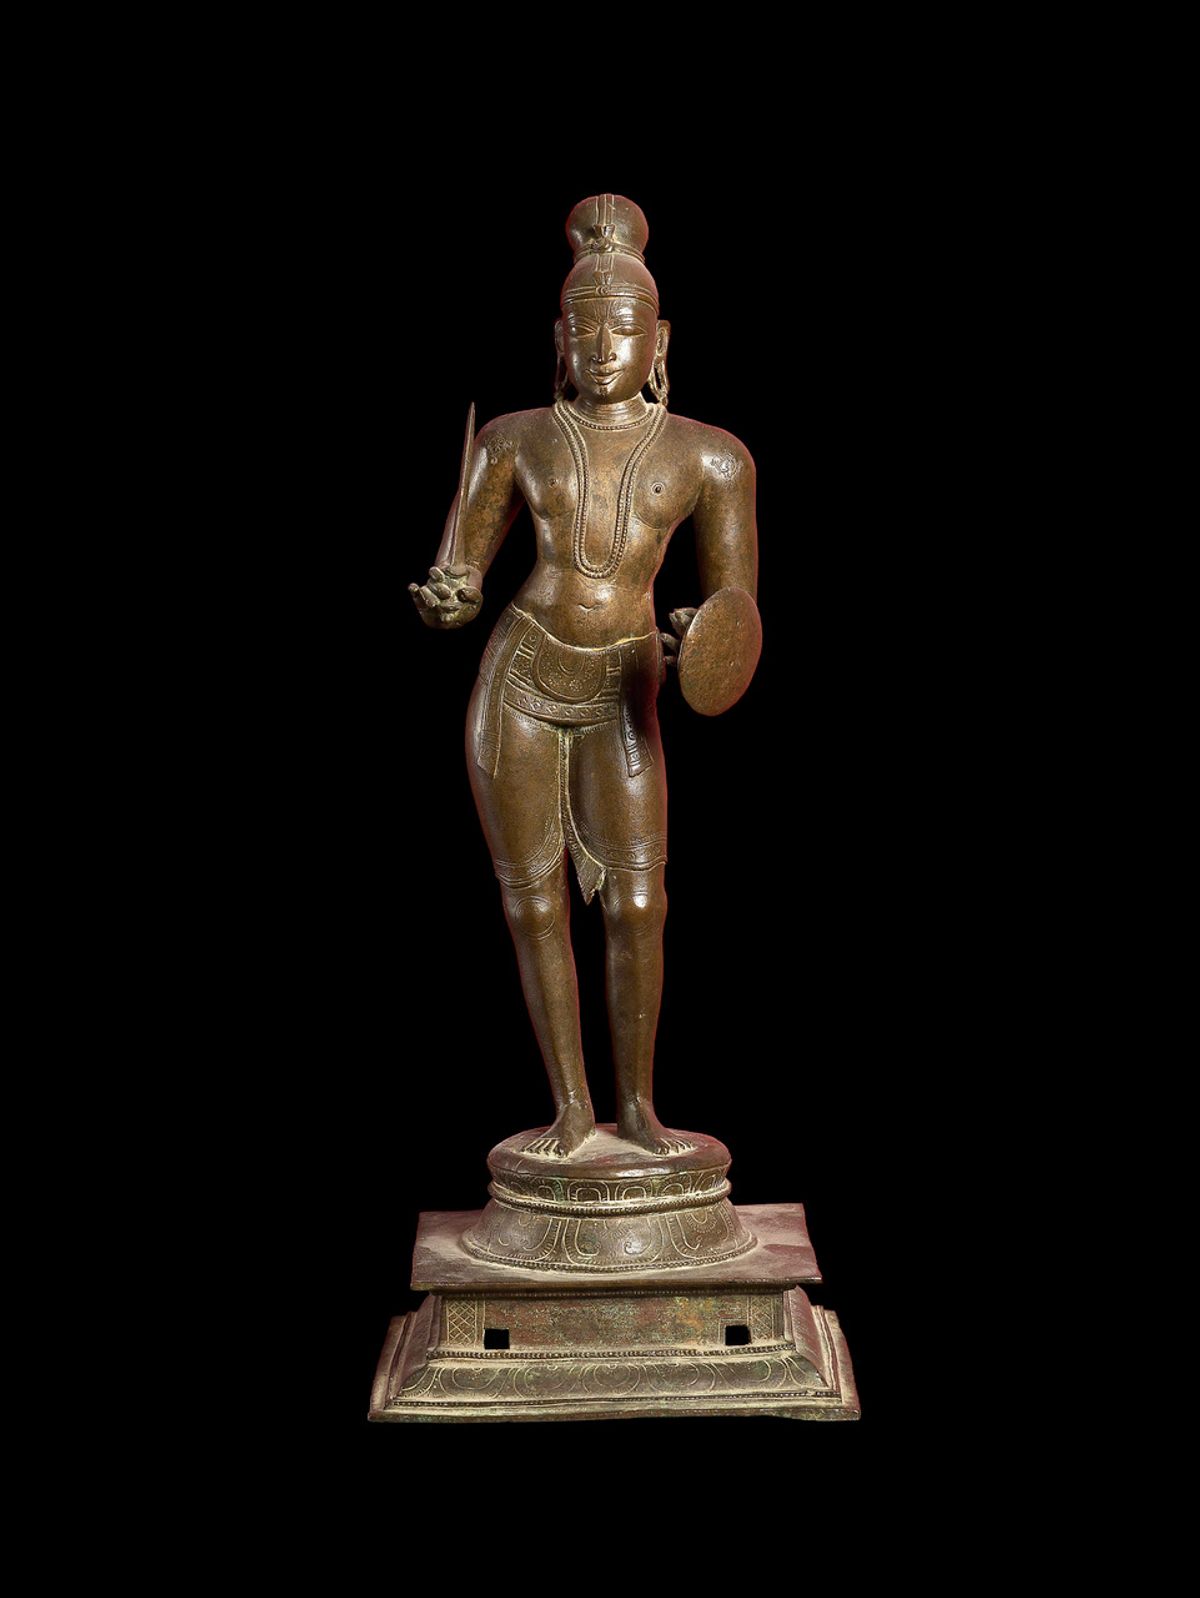 A 15th-century bronze idol in the Ashmolean Museum collection is believed to have been stolen from an Indian temple Photo: Ashmolean Museum, University of Oxford